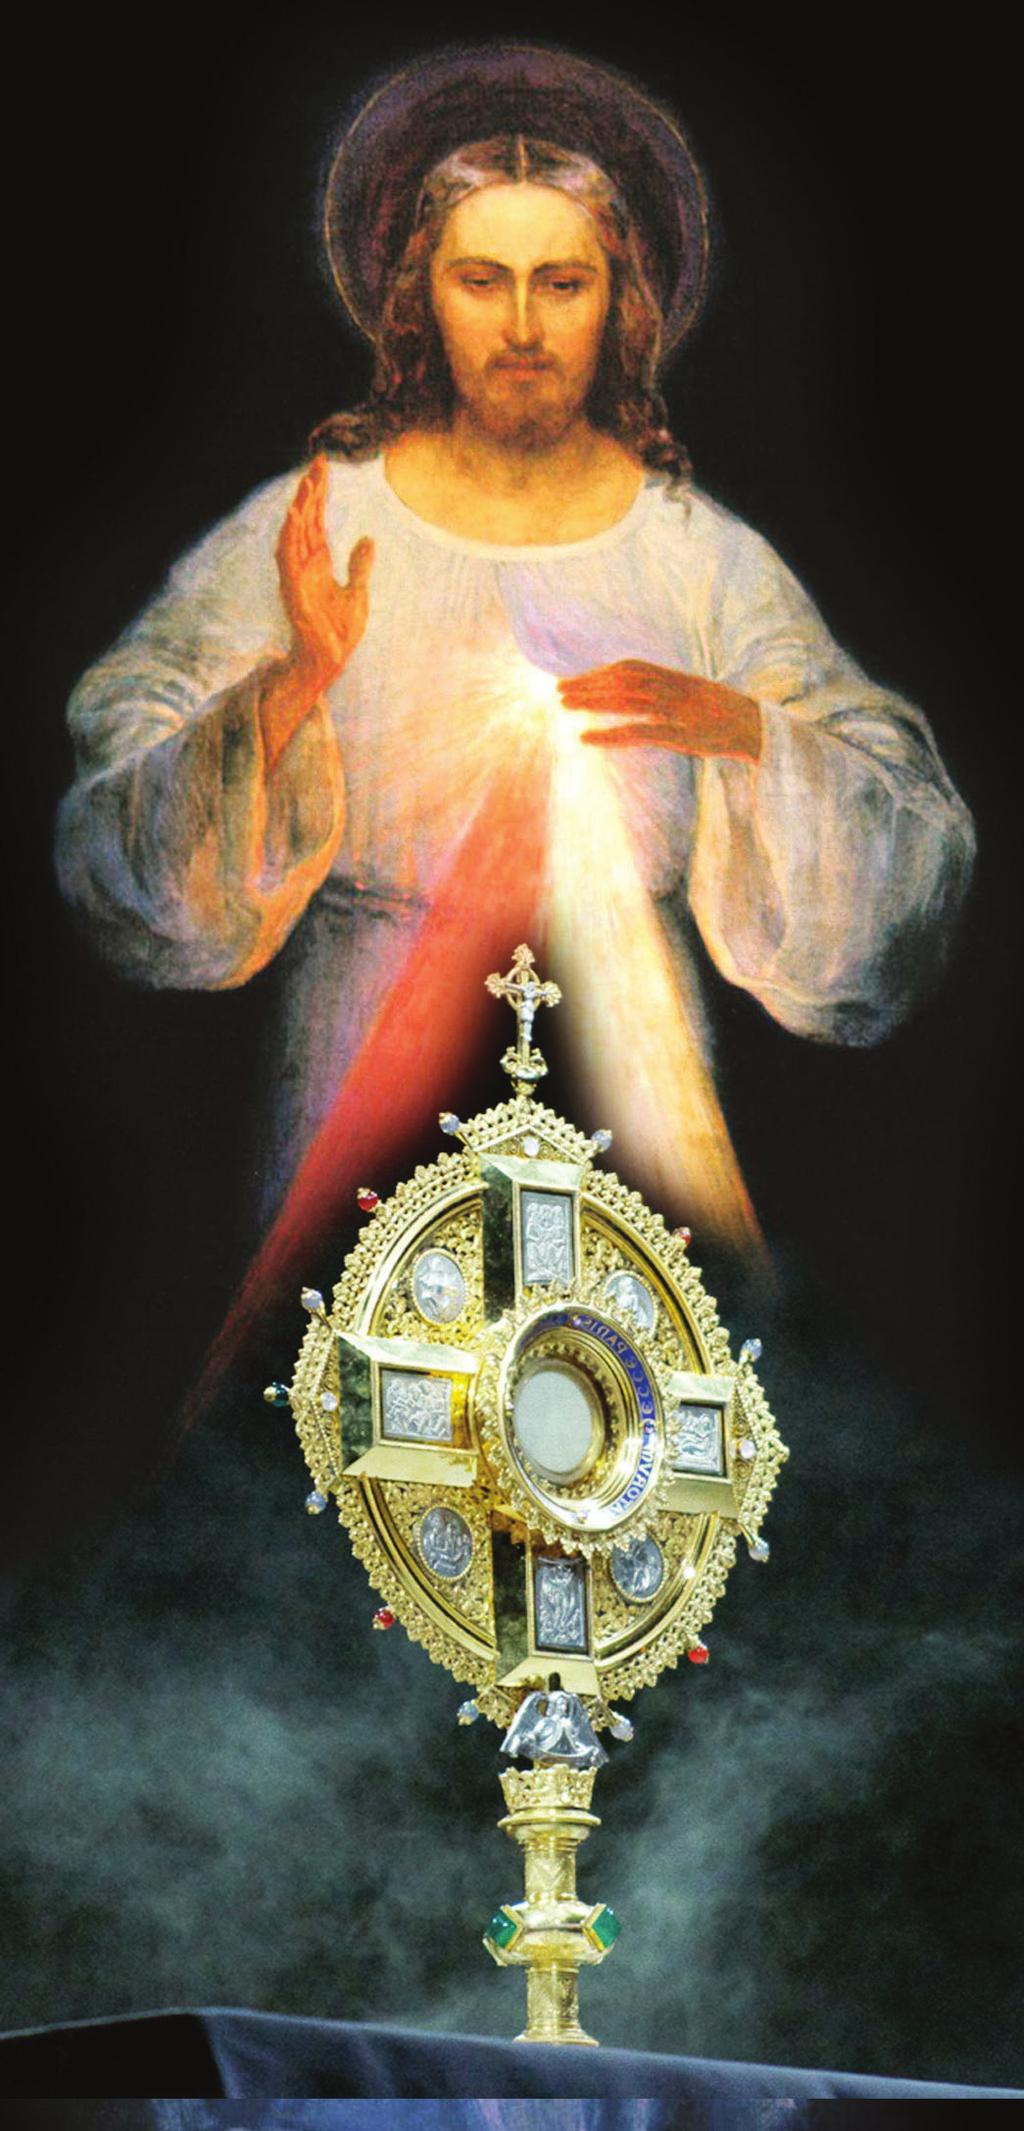 A Retreat on the Eucharist AND April 15 17 Schedule Friday April 15 6:00 PM Registration 6:30 PM Conference 1: To Be with Him and Proclaim the Kingdom Saturday April 16 8:30 AM Breakfast 9:45 AM